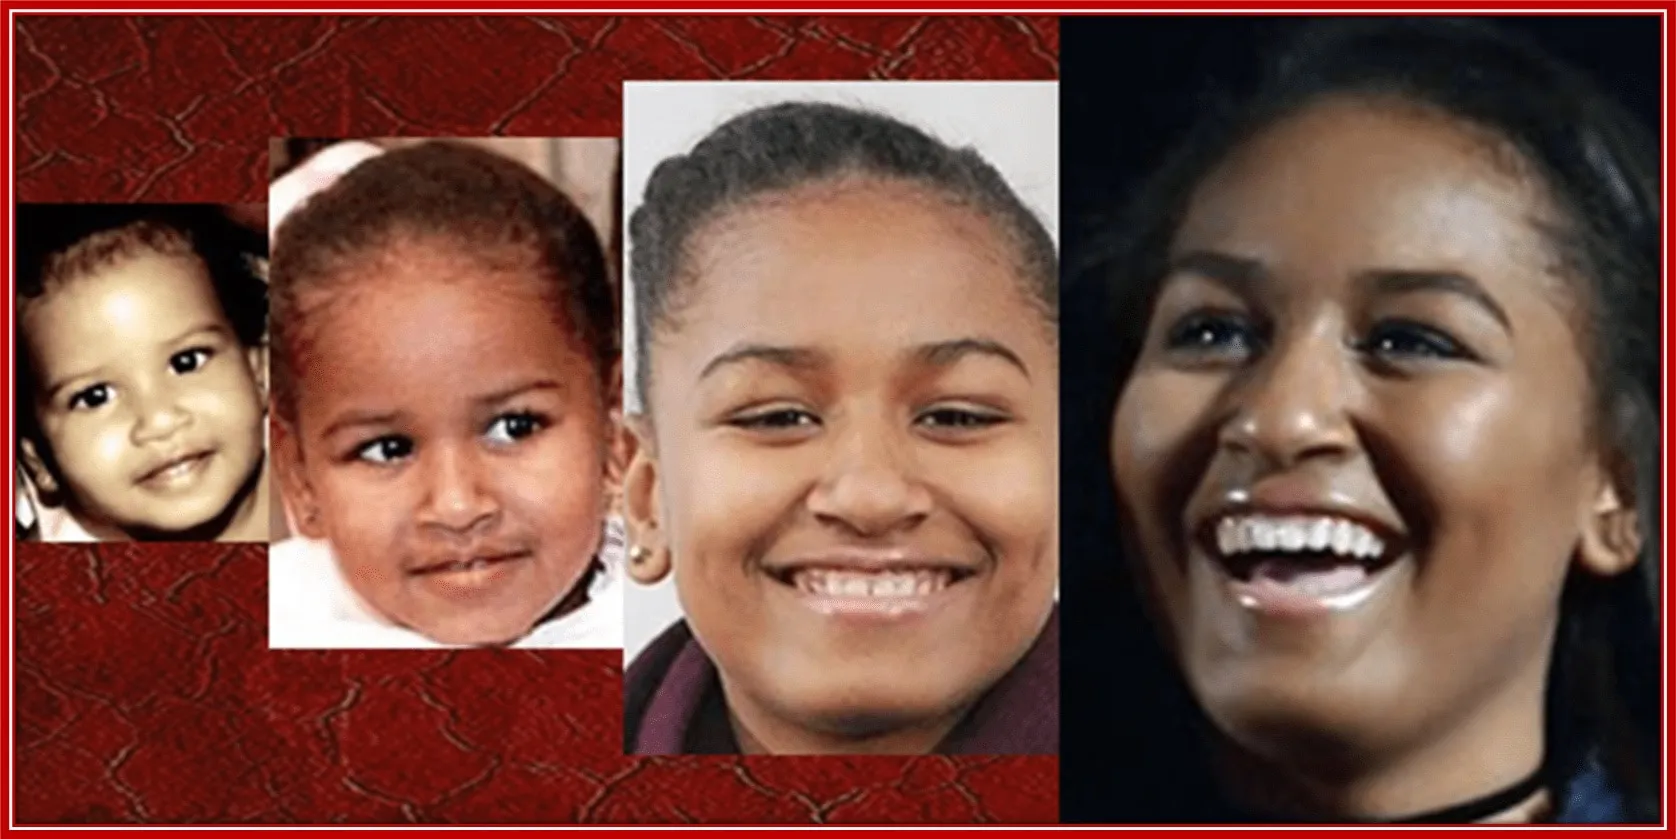 Sasha Obama Biography - Behold her Life story from cradle until her rise to fame.